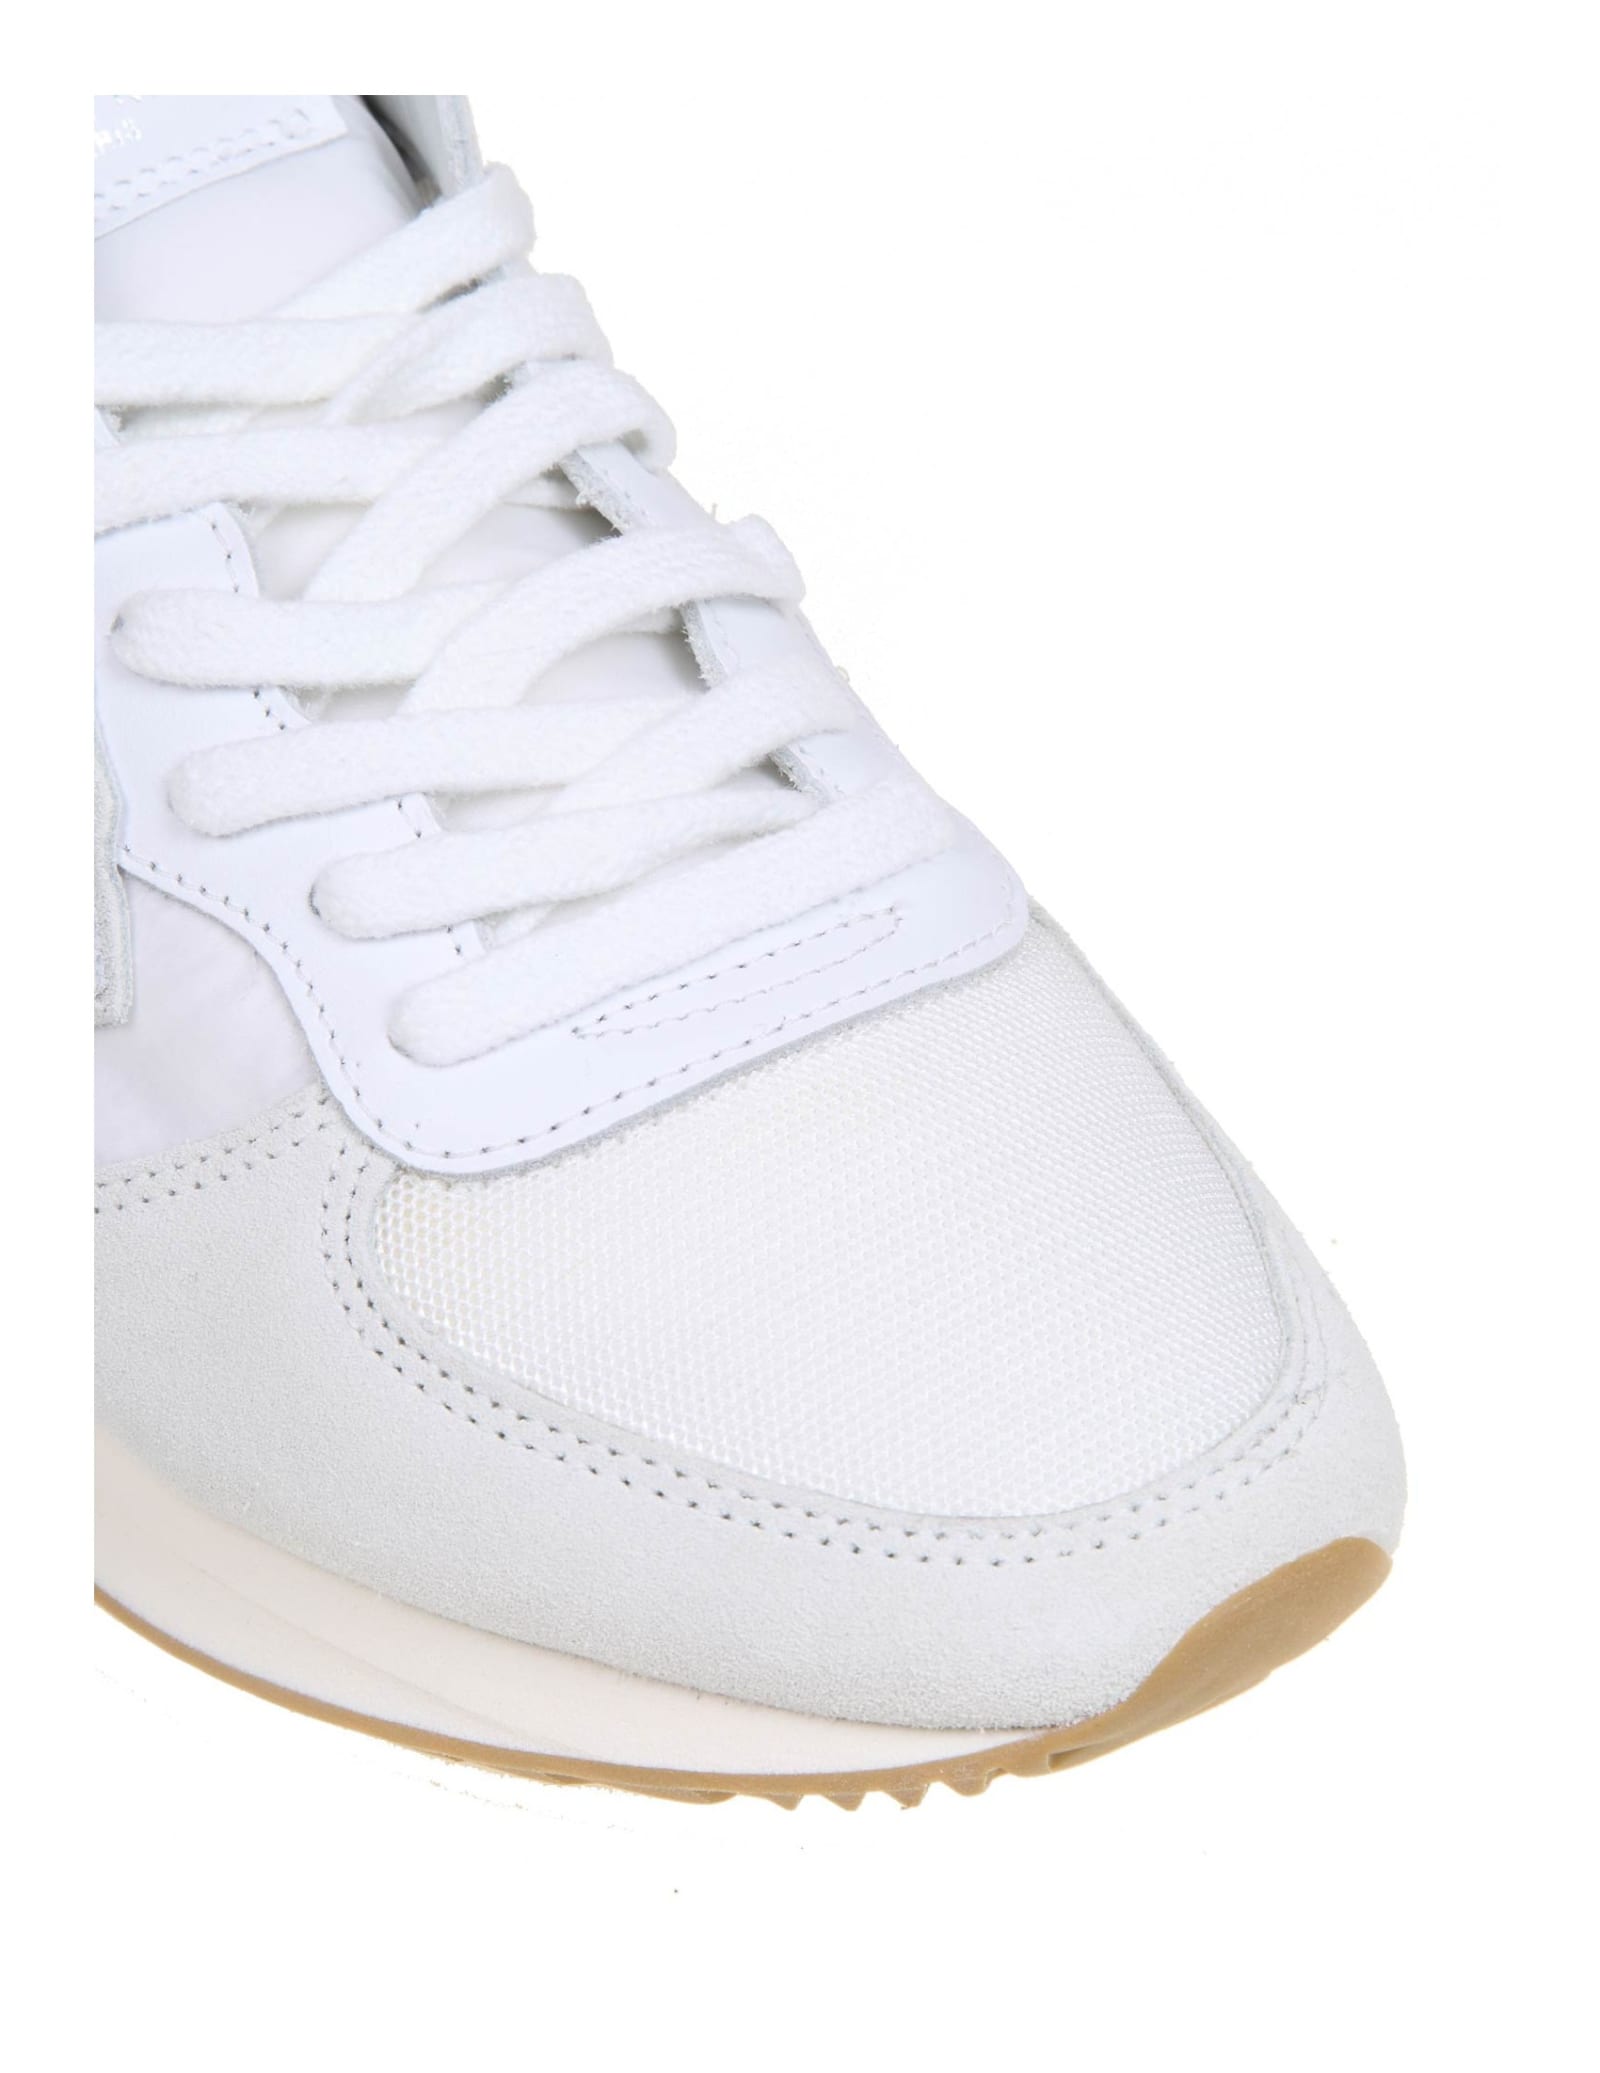 Shop Philippe Model Trpx Sneakers In Suede And Nylon In White